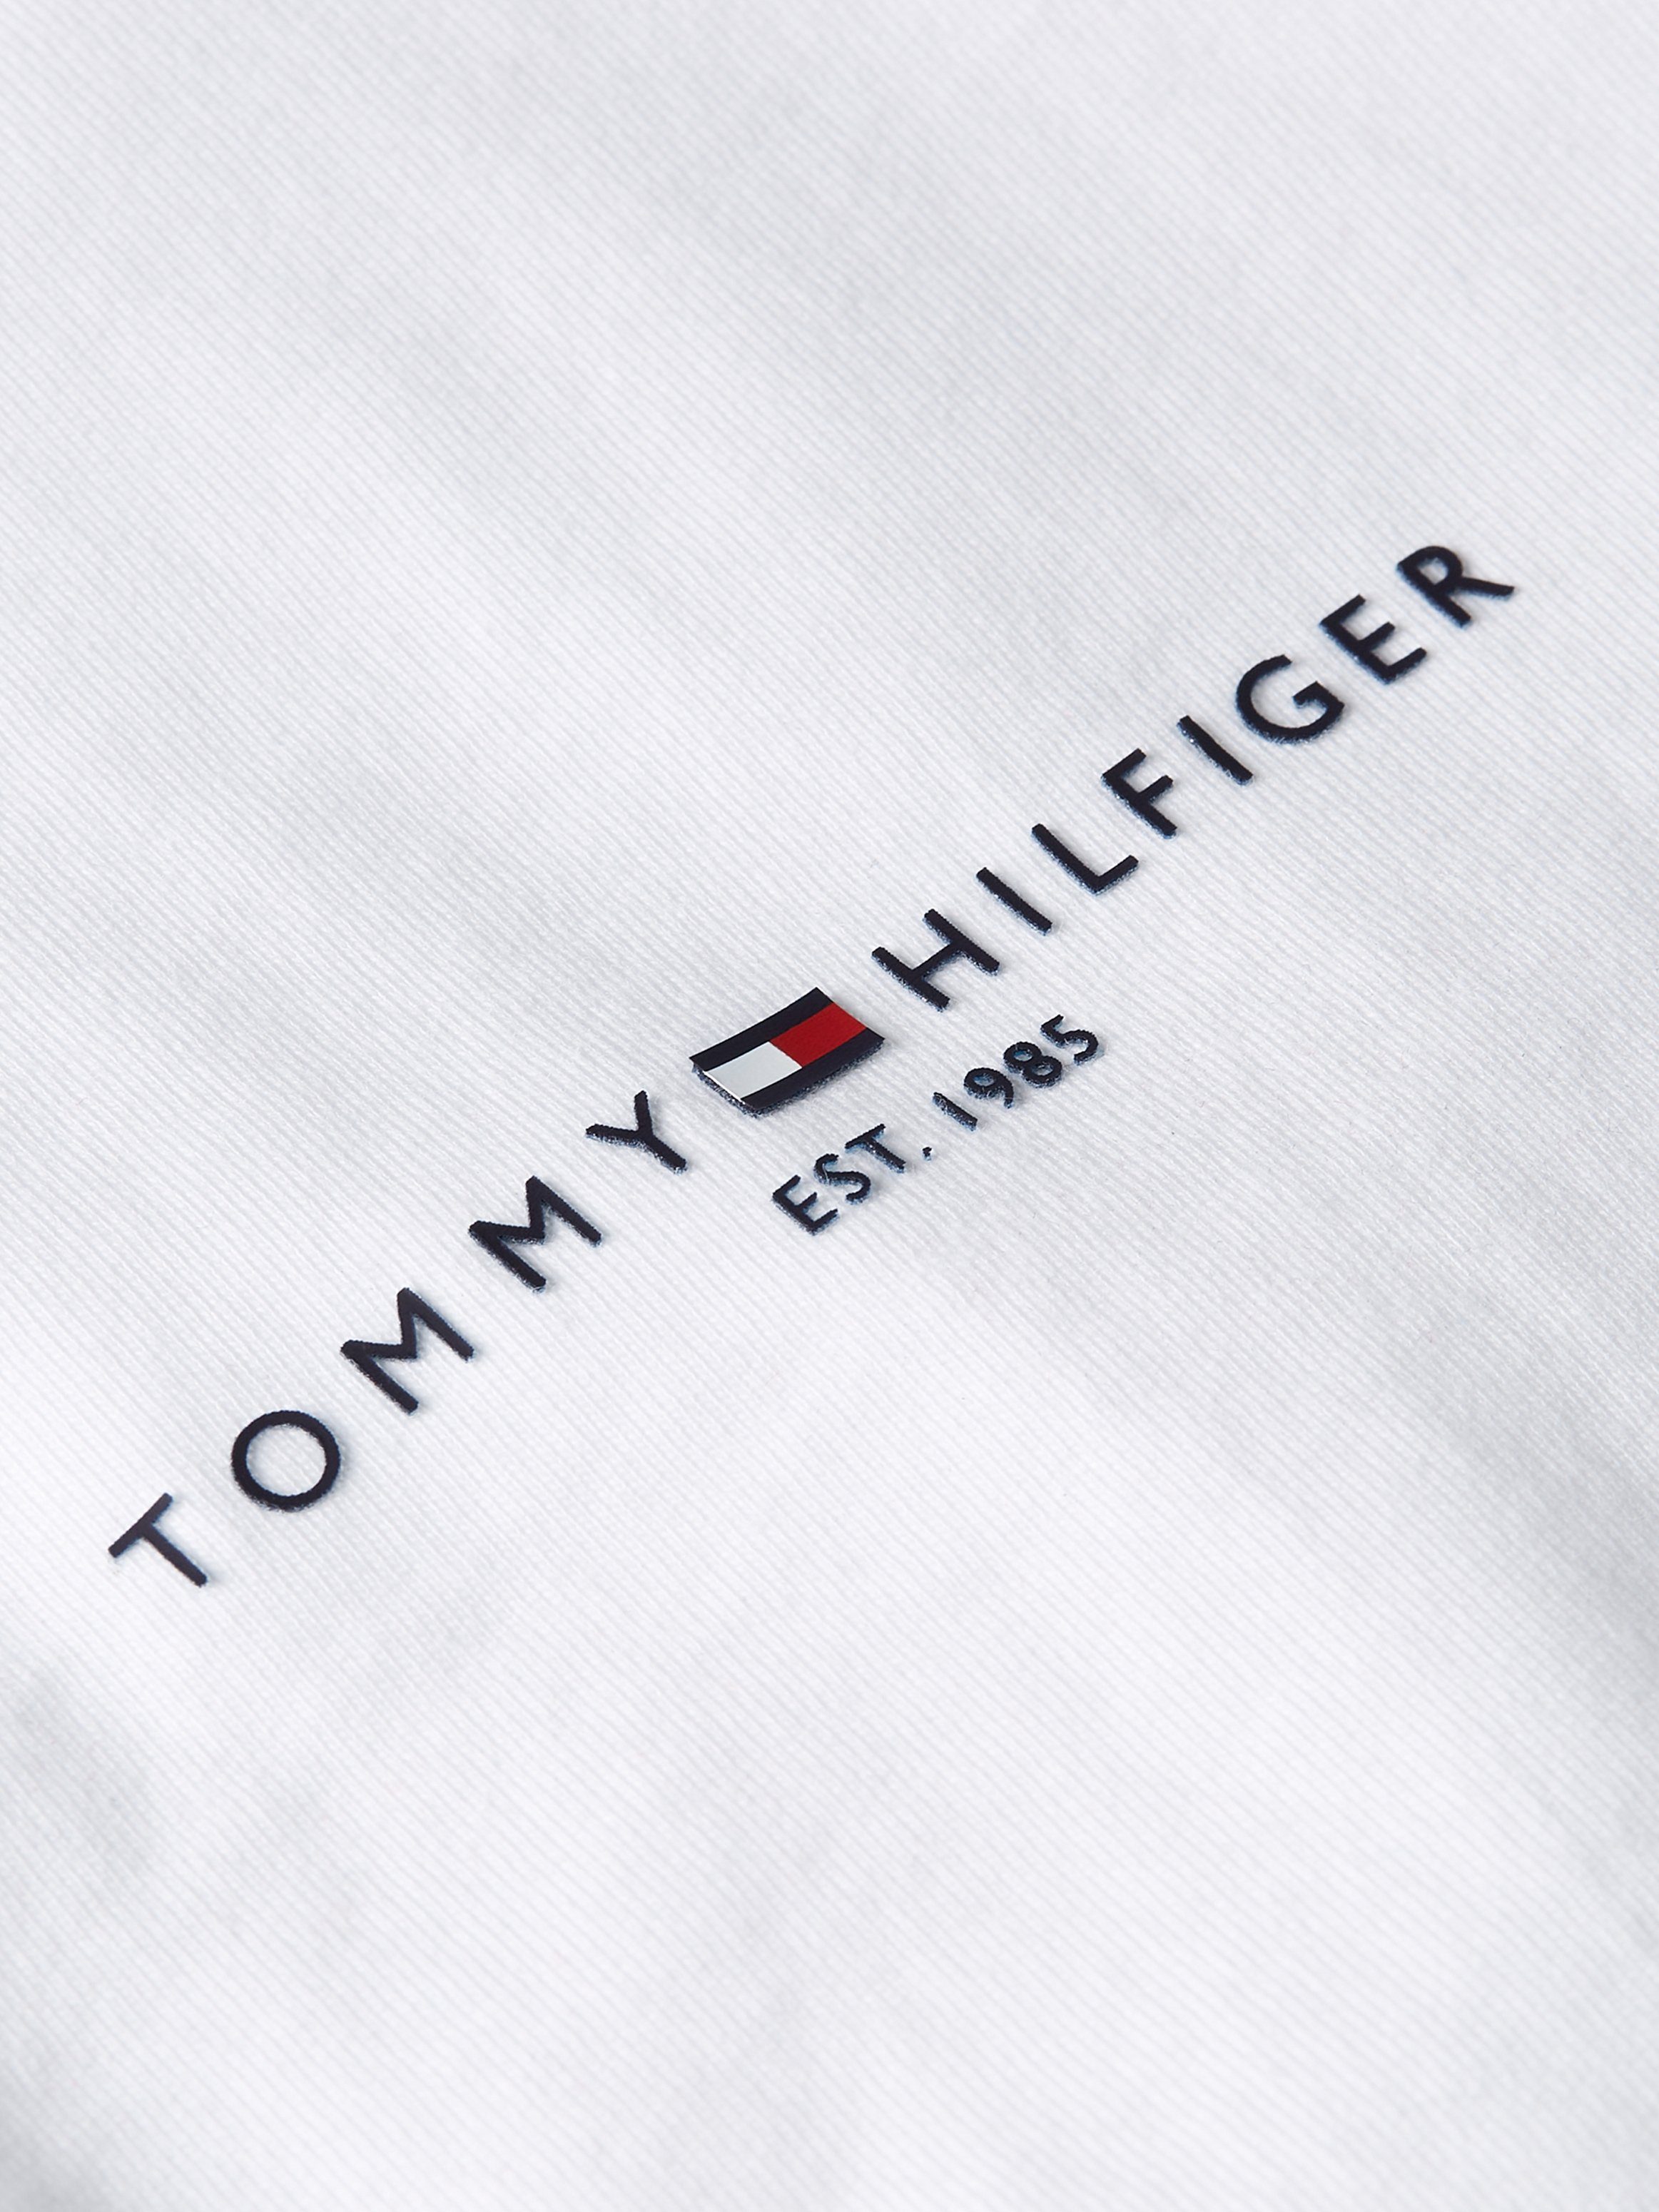 Tommy White T-Shirt Hilfiger TOMMY LOGO TIPPED TEE